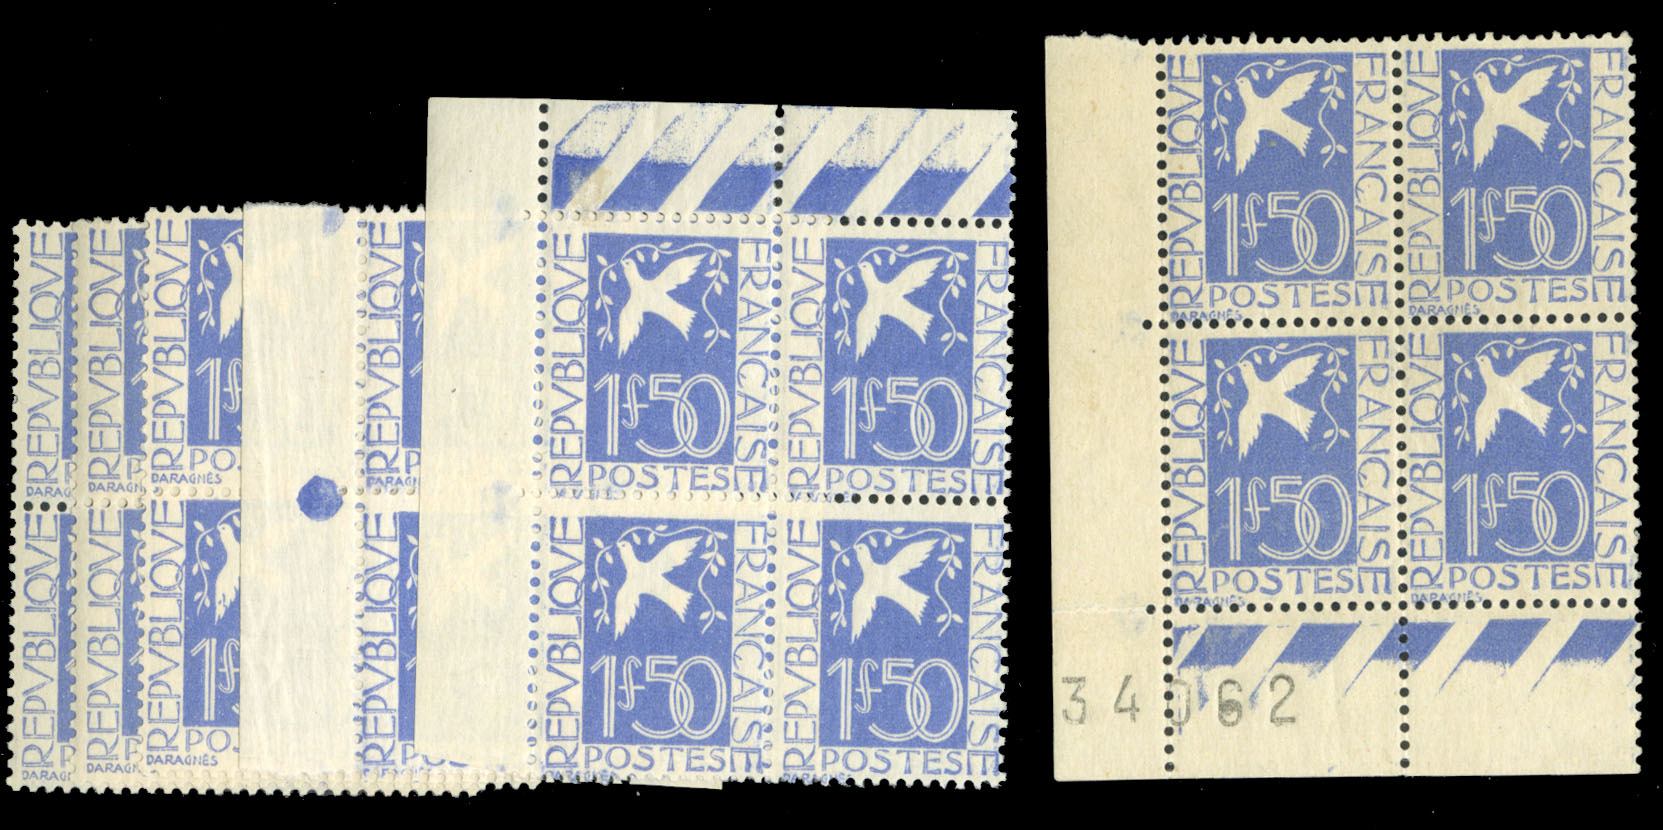 Lot 421 - FRENCH COLONIES French Guiana Air Post  -  Cherrystone Auctions Rare Stamps & Postal History of the World